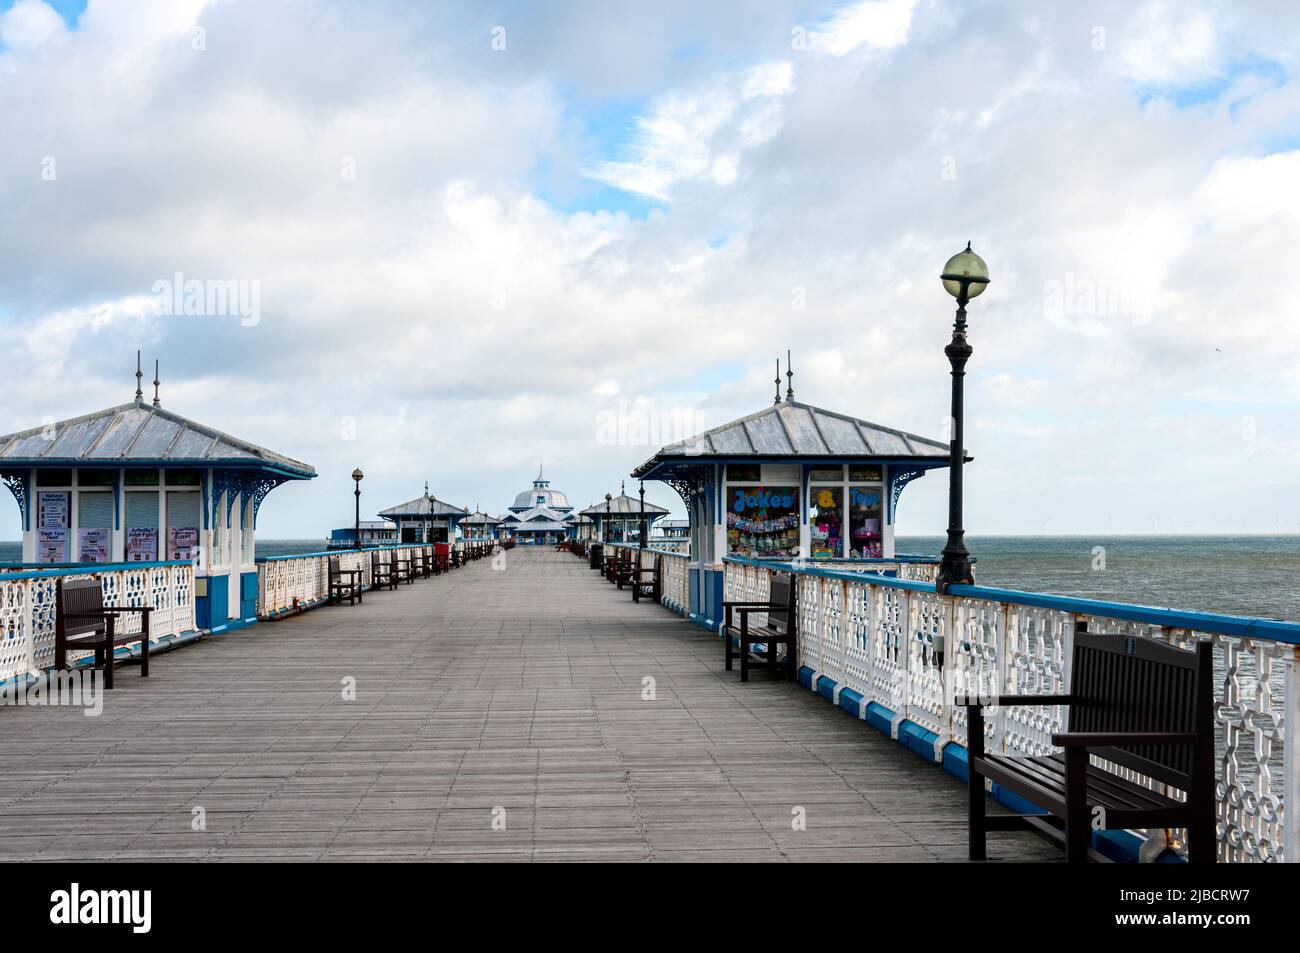 The building of Llandudno Pier was commenced in 1876 and completed in 1878 and is now a popular tourist attraction with its Victorian architecture Stock Photo